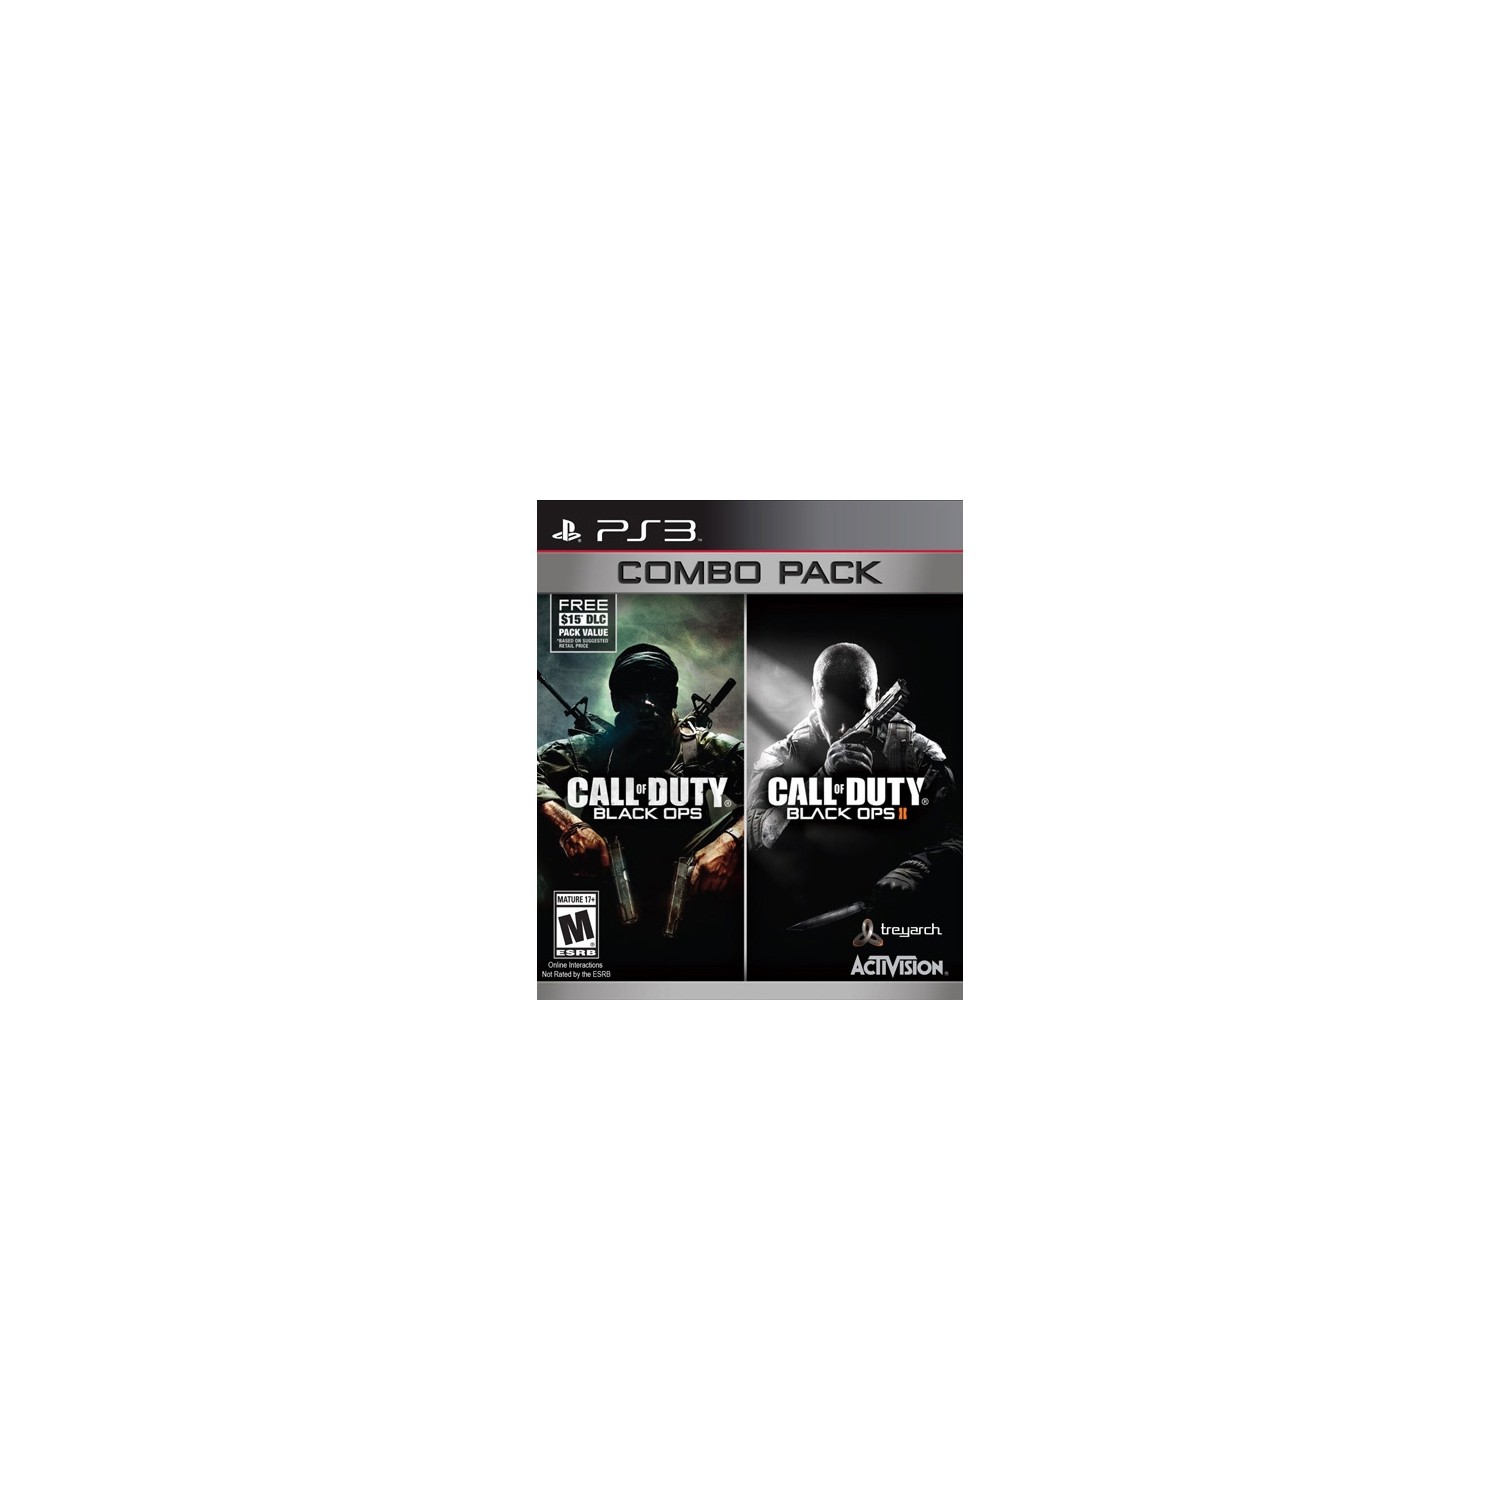 COD Call of Duty Black Ops 1&2 Combo Pack (PS3)